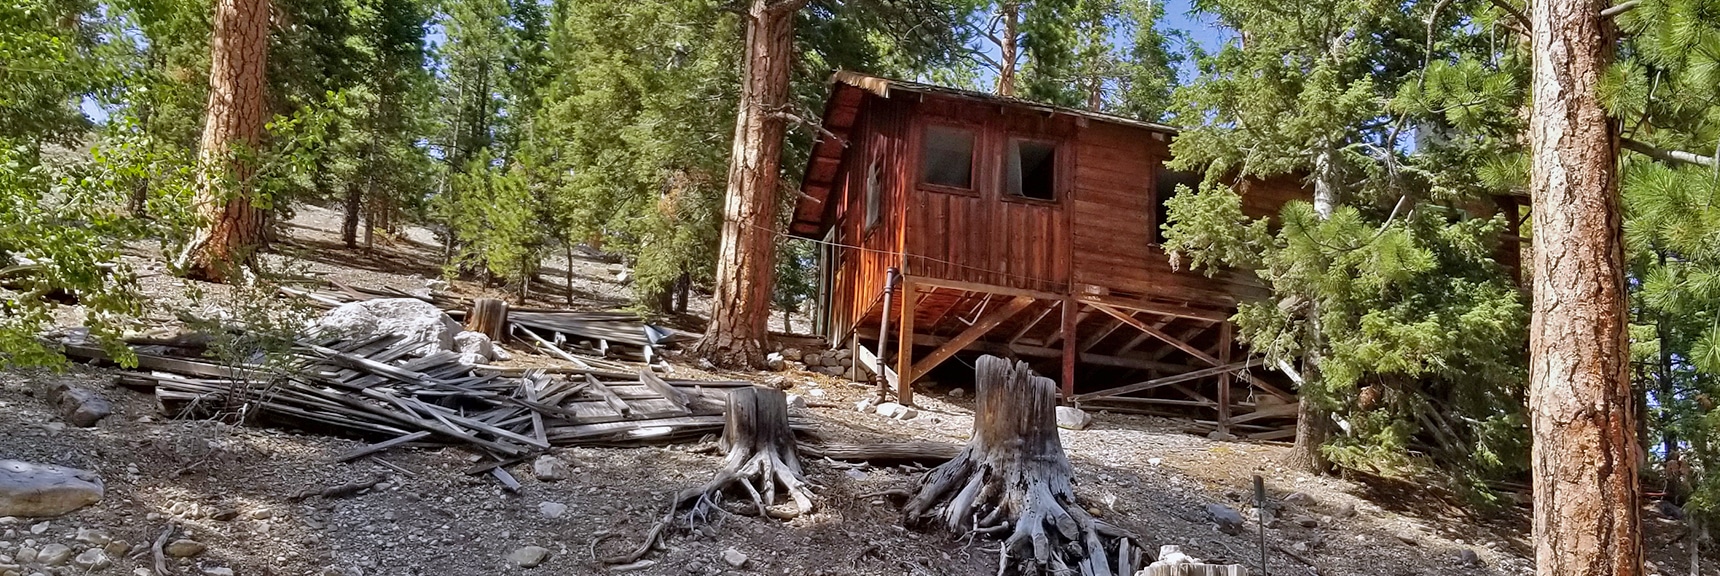 Old Abandoned Cabin Marks Place Where the Small Upper Road Meets the Main Road | Deer Creek Rd - Mummy Cliffs - Mummy Springs - Raintree - Fletcher Peak - Cougar Ridge Trail Circuit | Mt Charleston Wilderness | Spring Mountains, Nevada